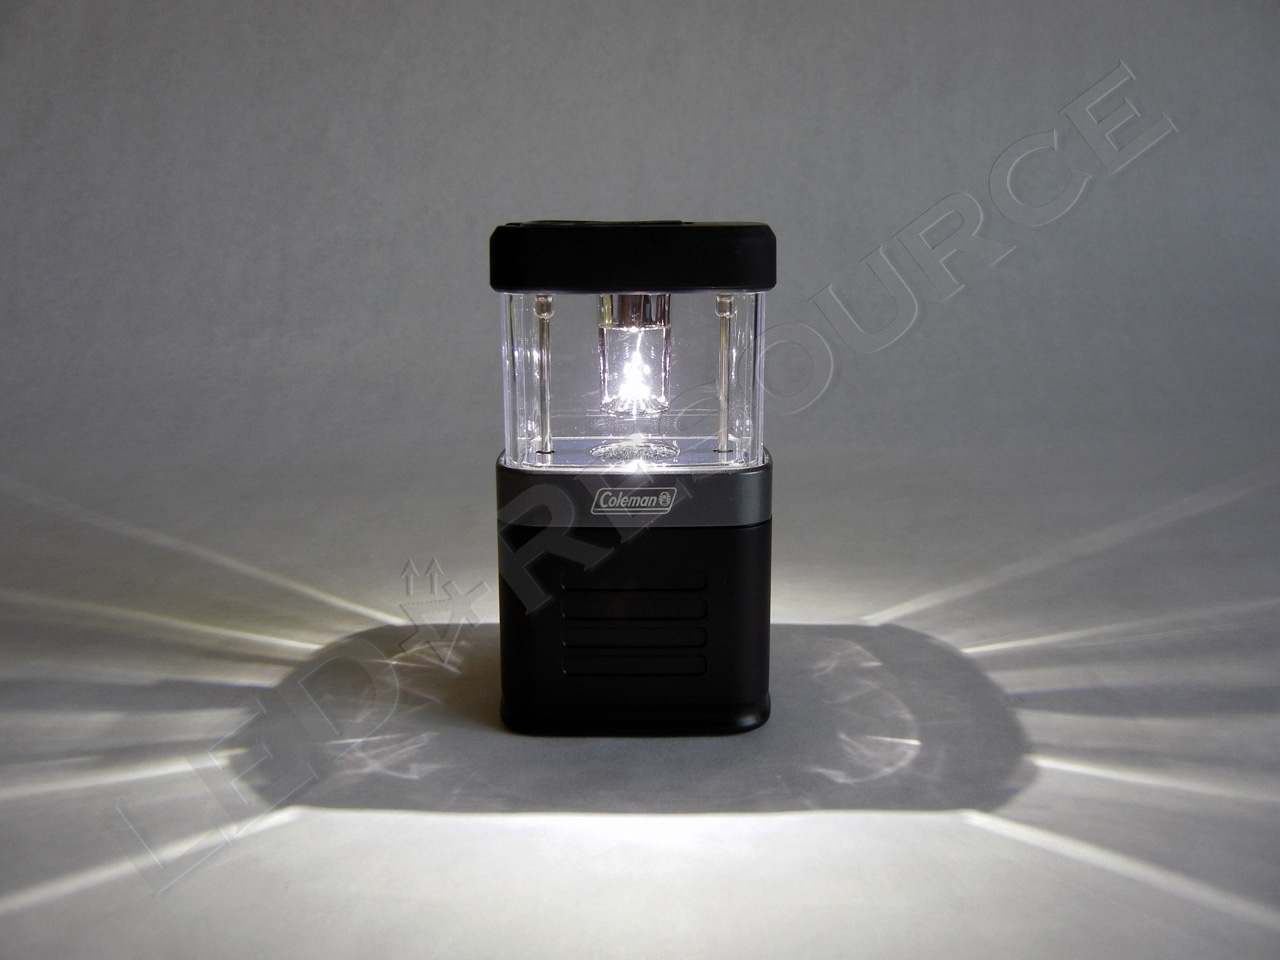 Coleman Exponent 4AA Pack-Away LED Lantern Review - LED-Resource